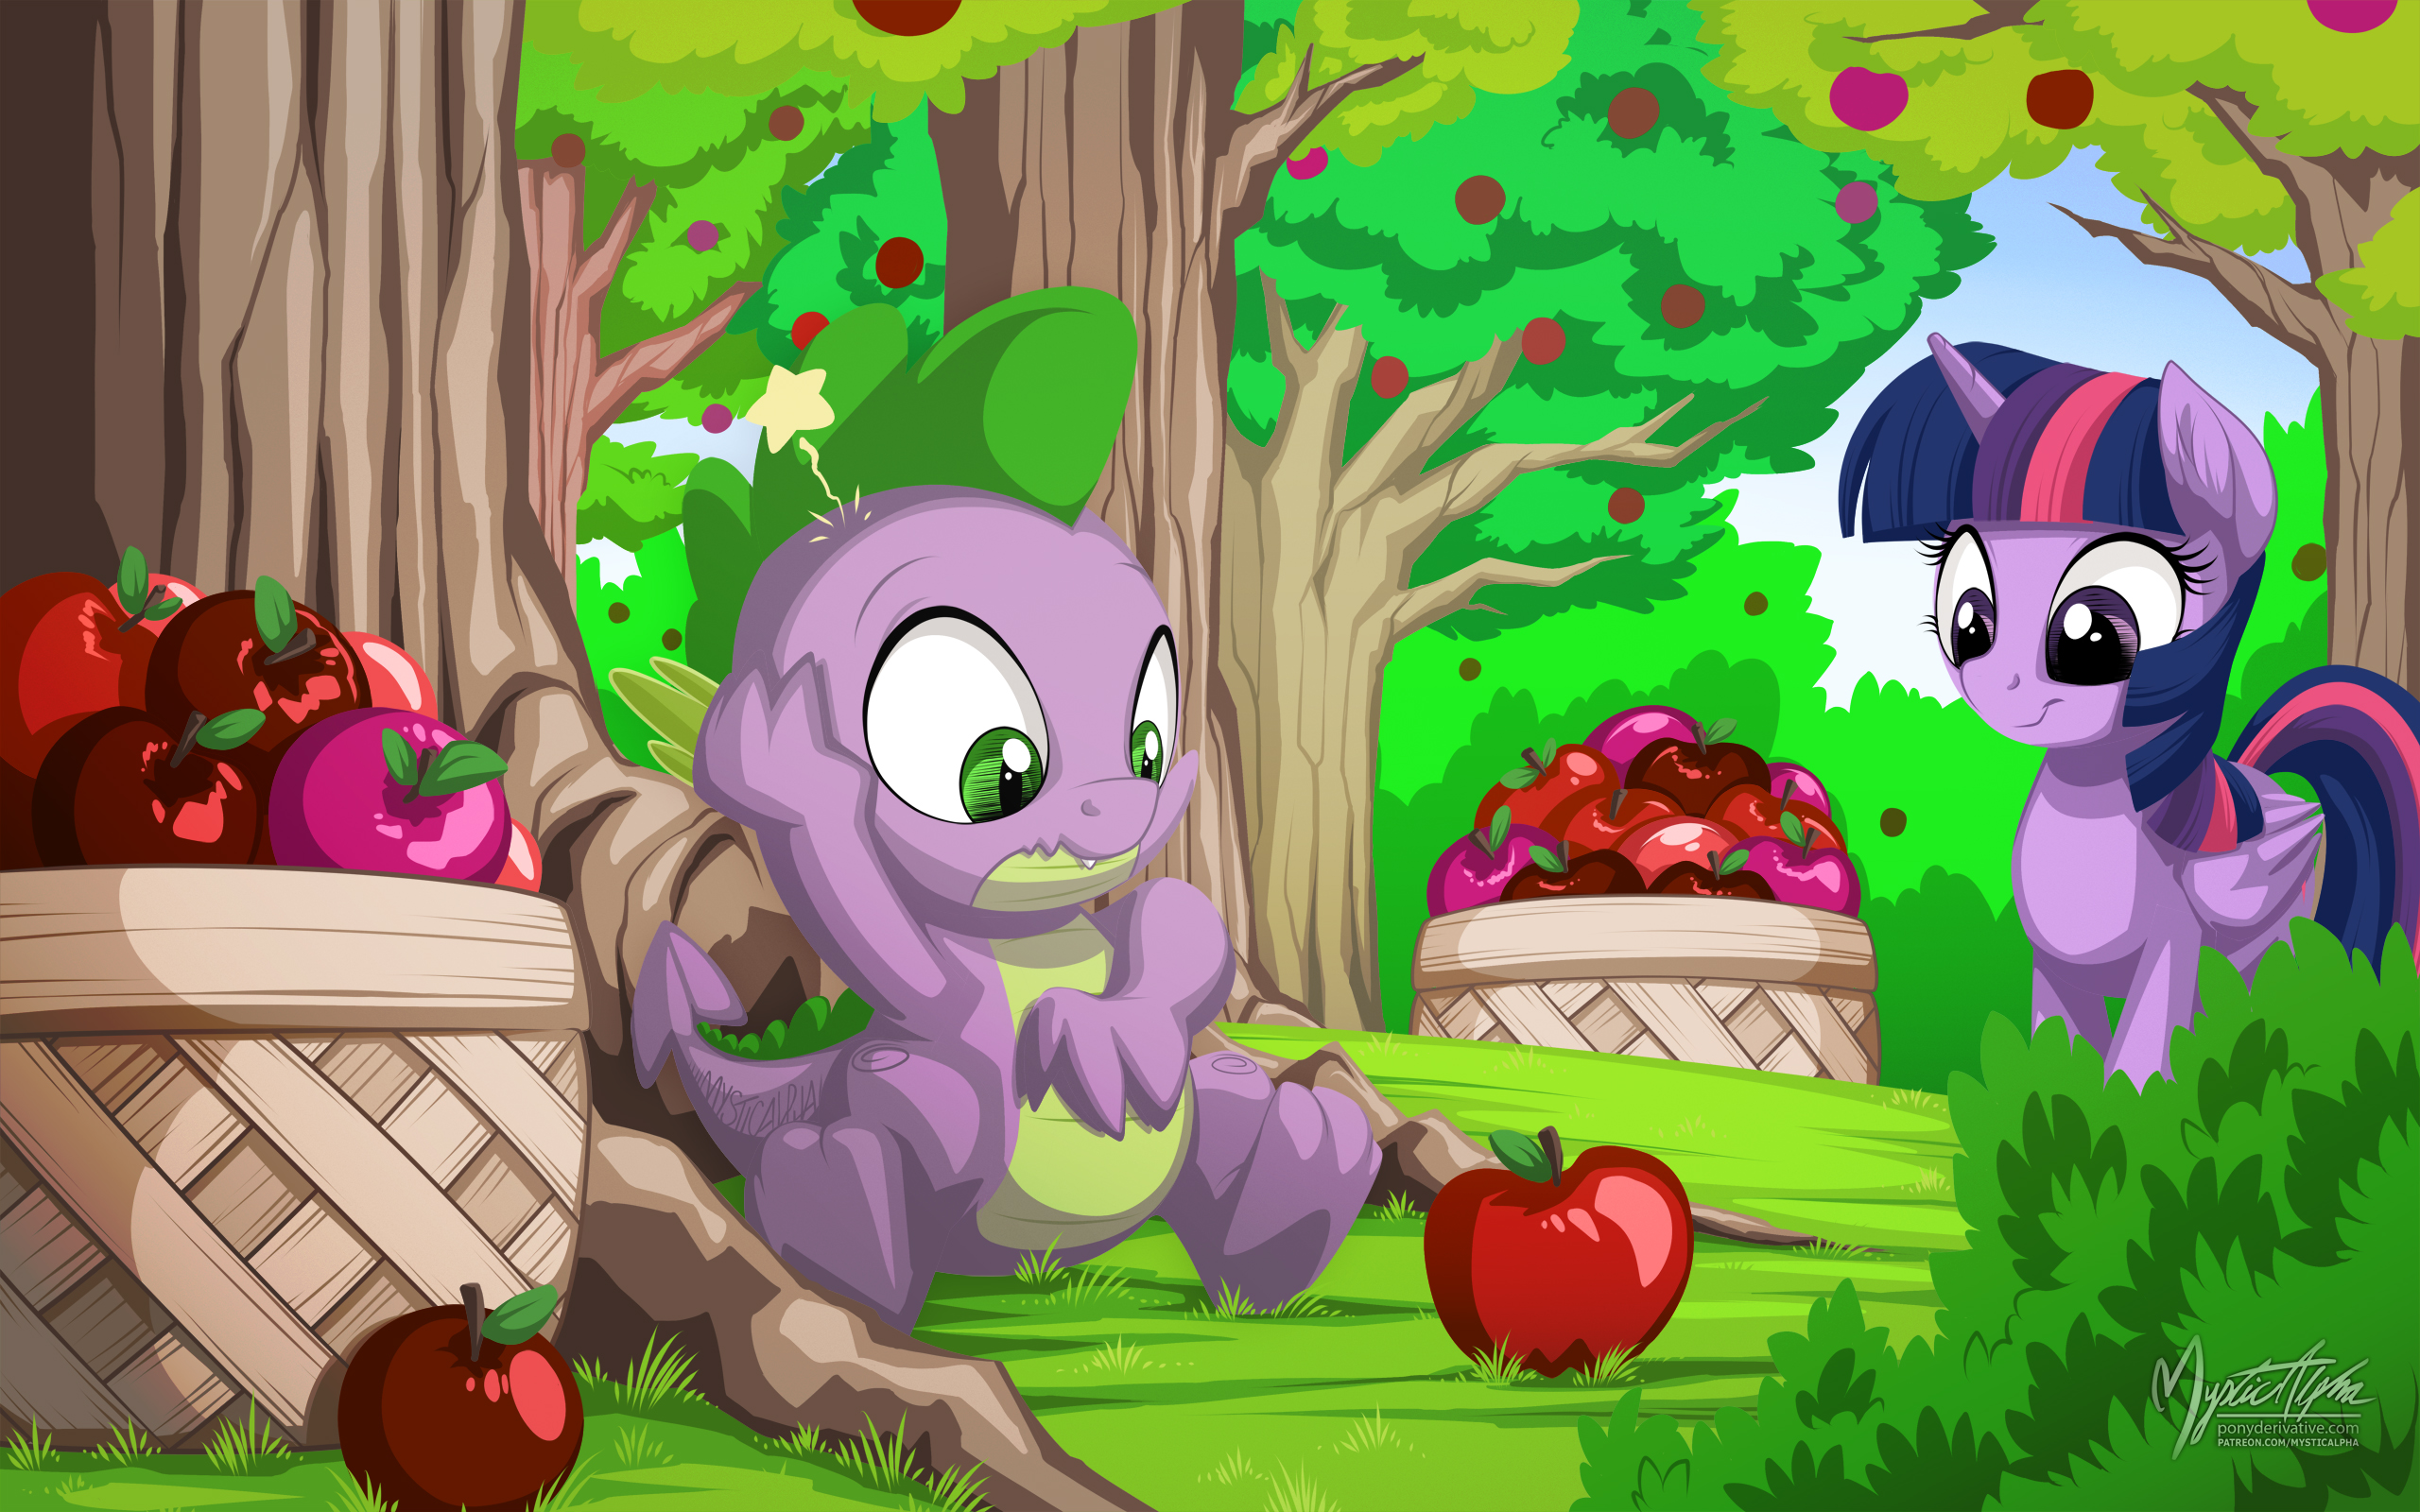 Twilight and Spike at Apple Acres